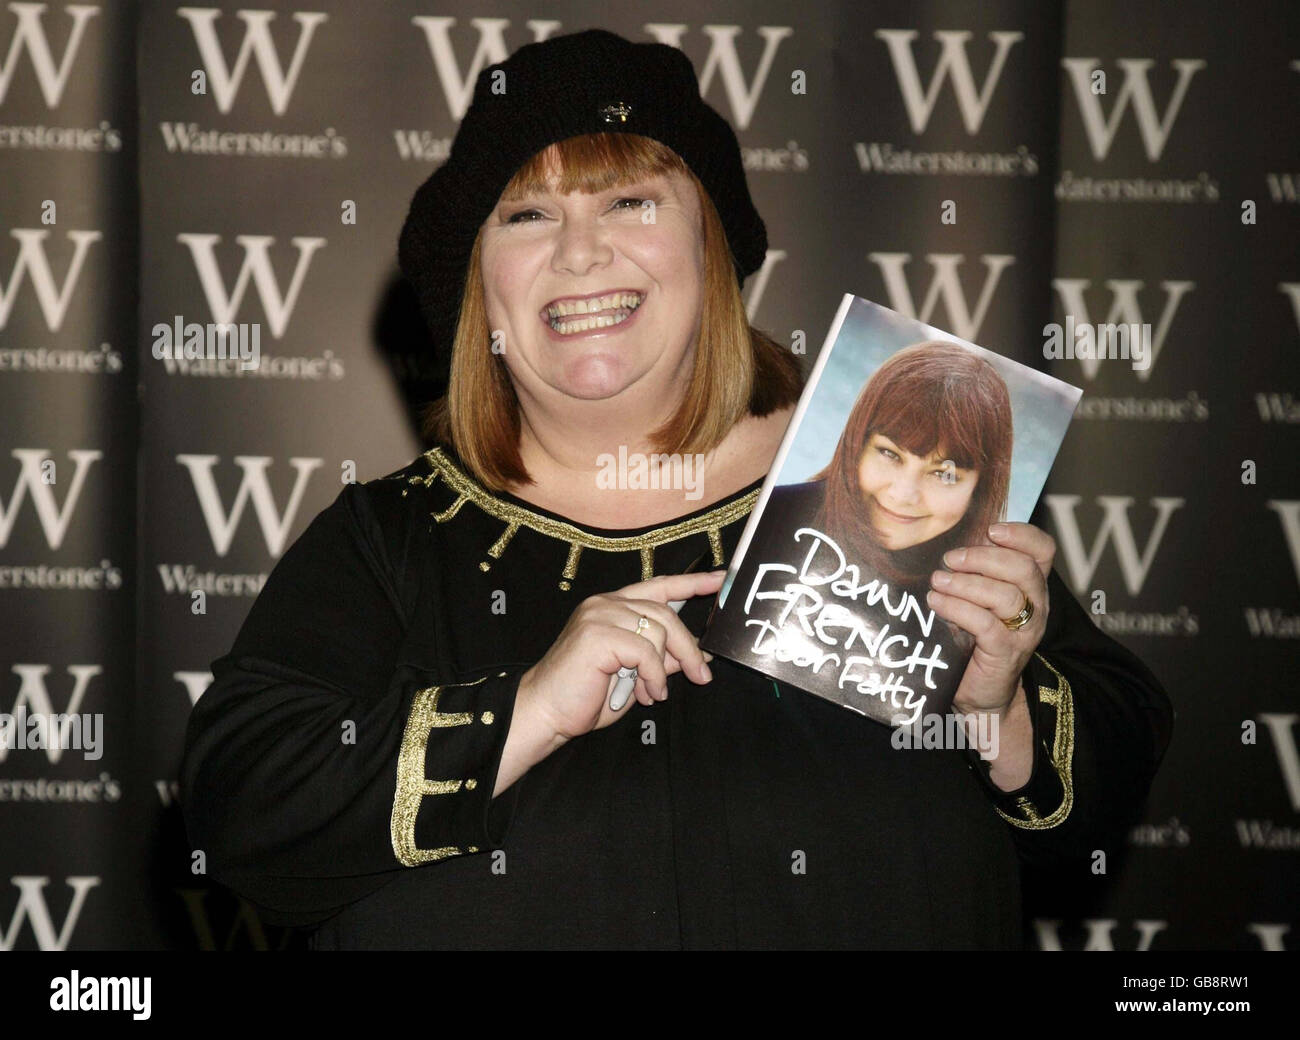 Dawn French during a book signing session for her autobiography 'Dear Fatty', at Waterstone's in Piccadilly, central London. Stock Photo